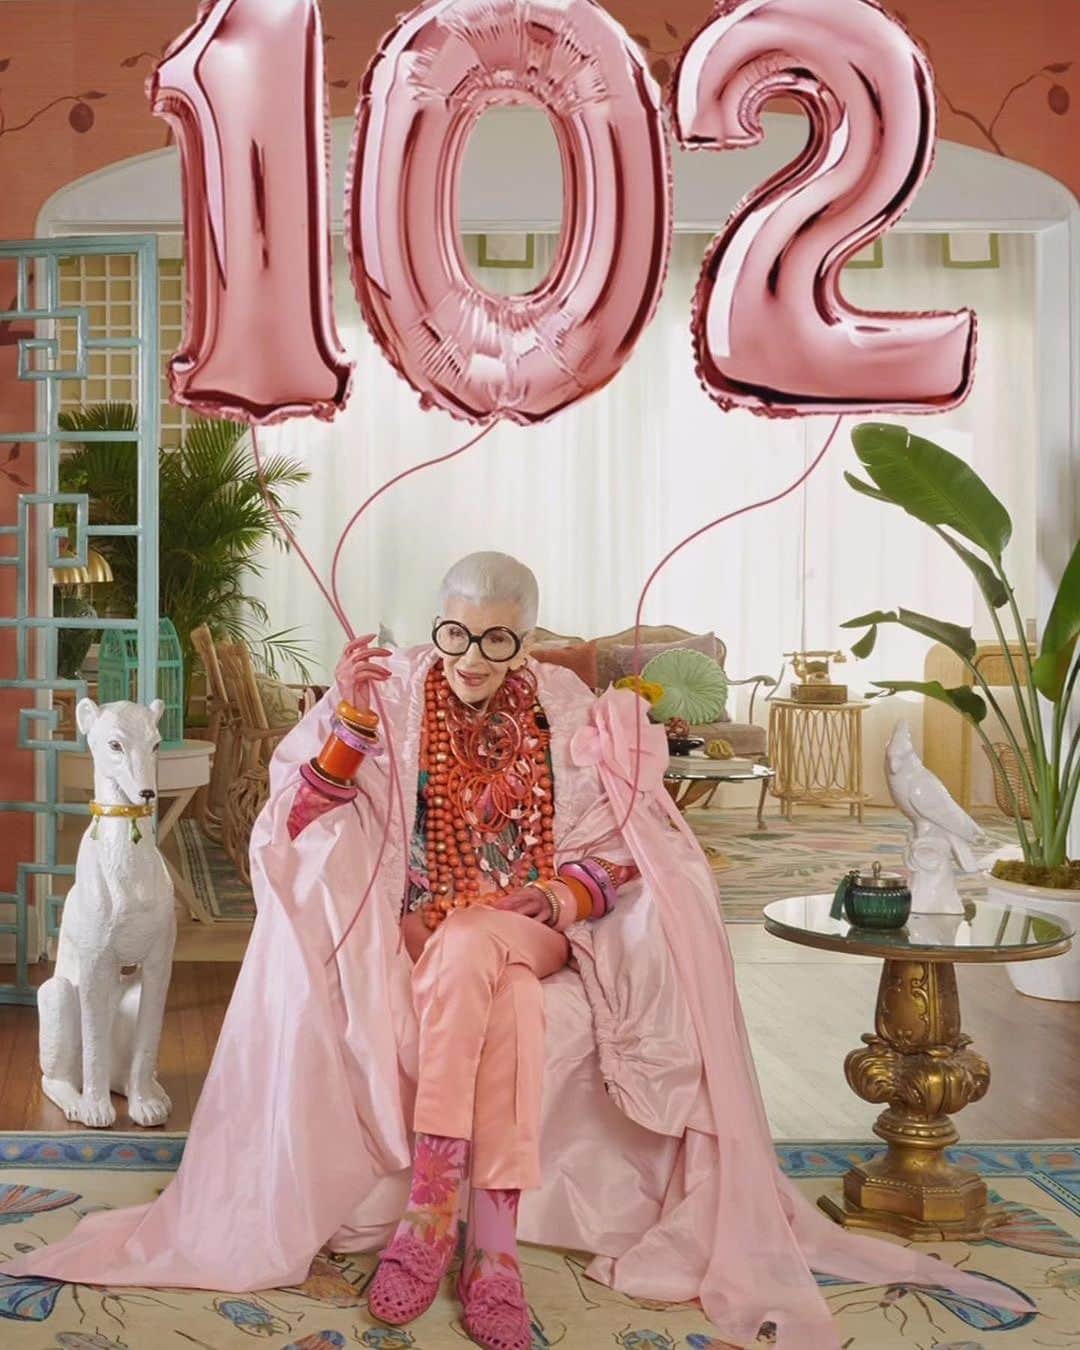 StreetArtGlobeのインスタグラム：「Happy birthday @iris.apfel! 🎉🥳🎂  Style icon Iris Apfel has just celebrated turning 102 years old, reaching the milestone age on Wednesday 29 August.   Iris an American businesswoman, interior designer, and fashion icon. In business with her husband, Carl, from 1950 to 1992, Apfel led a career in textiles, including a contract with the White House that spanned nine presidencies.   In retirement, she drew acclaim for a 2005 show at the Costume Institute at The Metropolitan Museum of Art featuring her collection of costume jewelry and styled with clothes on mannequins as she would wear it.   She has become a fashion icon, signing to IMG in 2019 as a model at age 97, and she was featured in a 2014 documentary called Iris by Albert Maysles.」